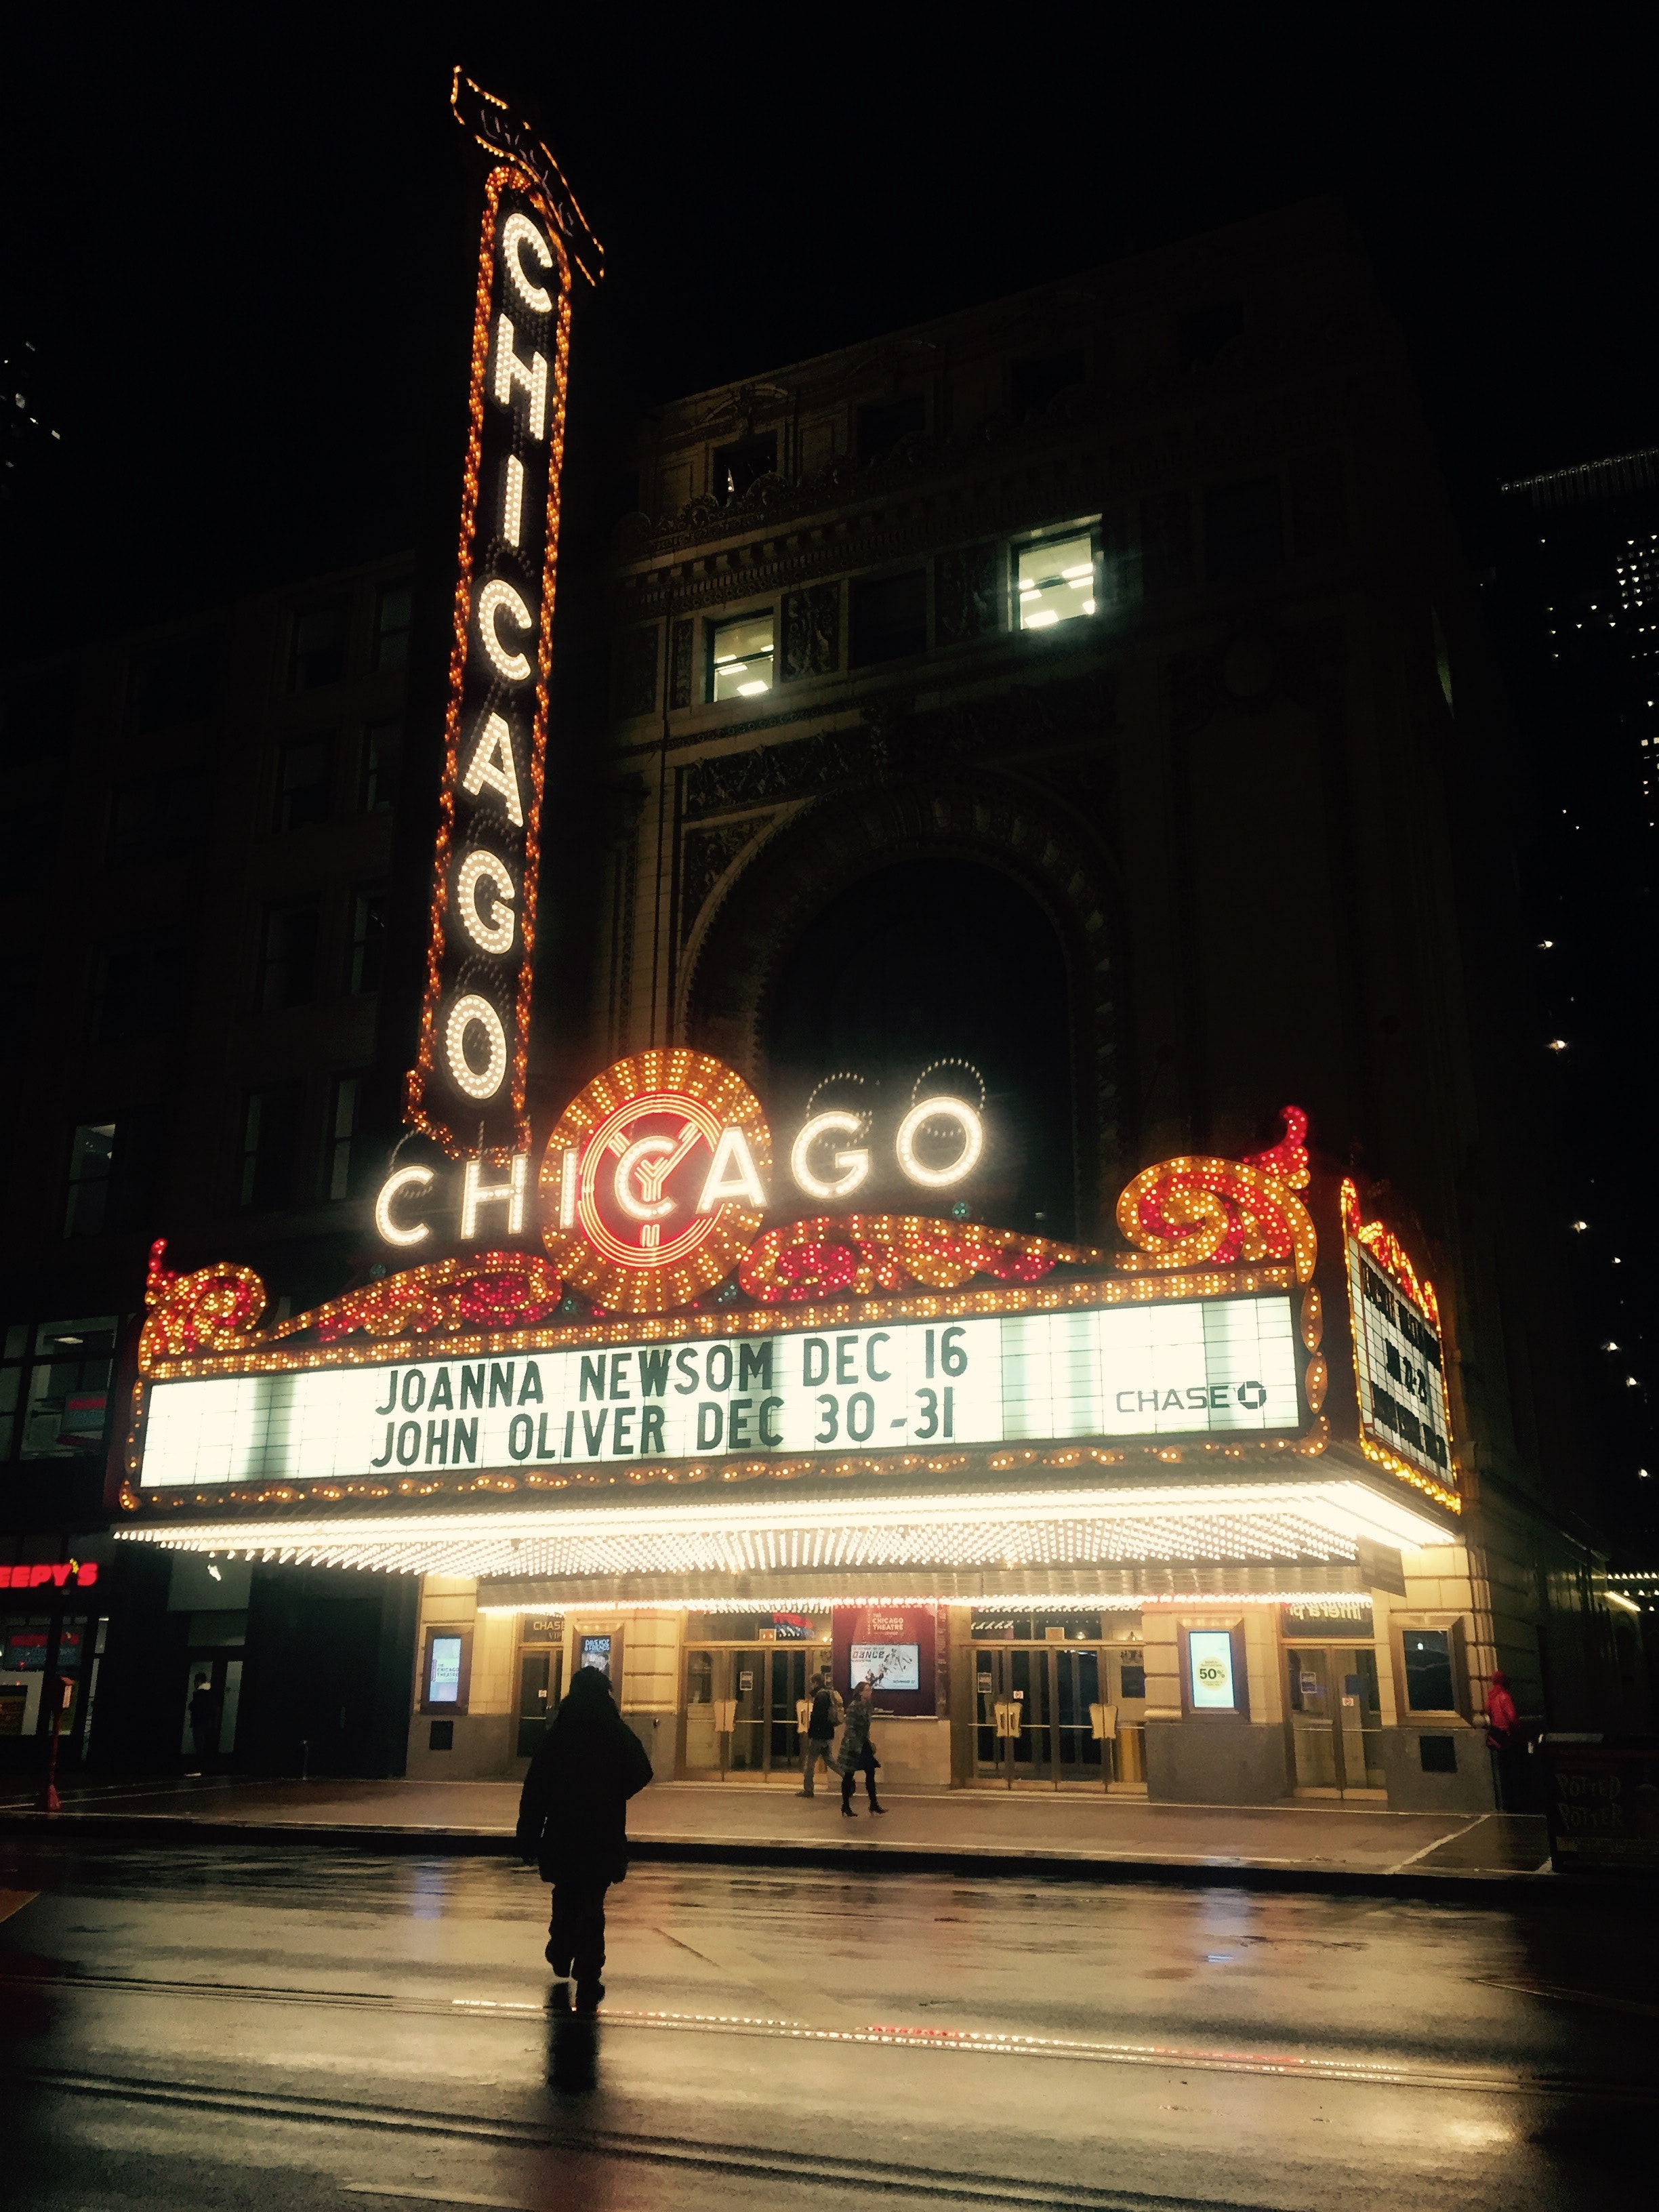 Chicago movie theater during nighttime photo